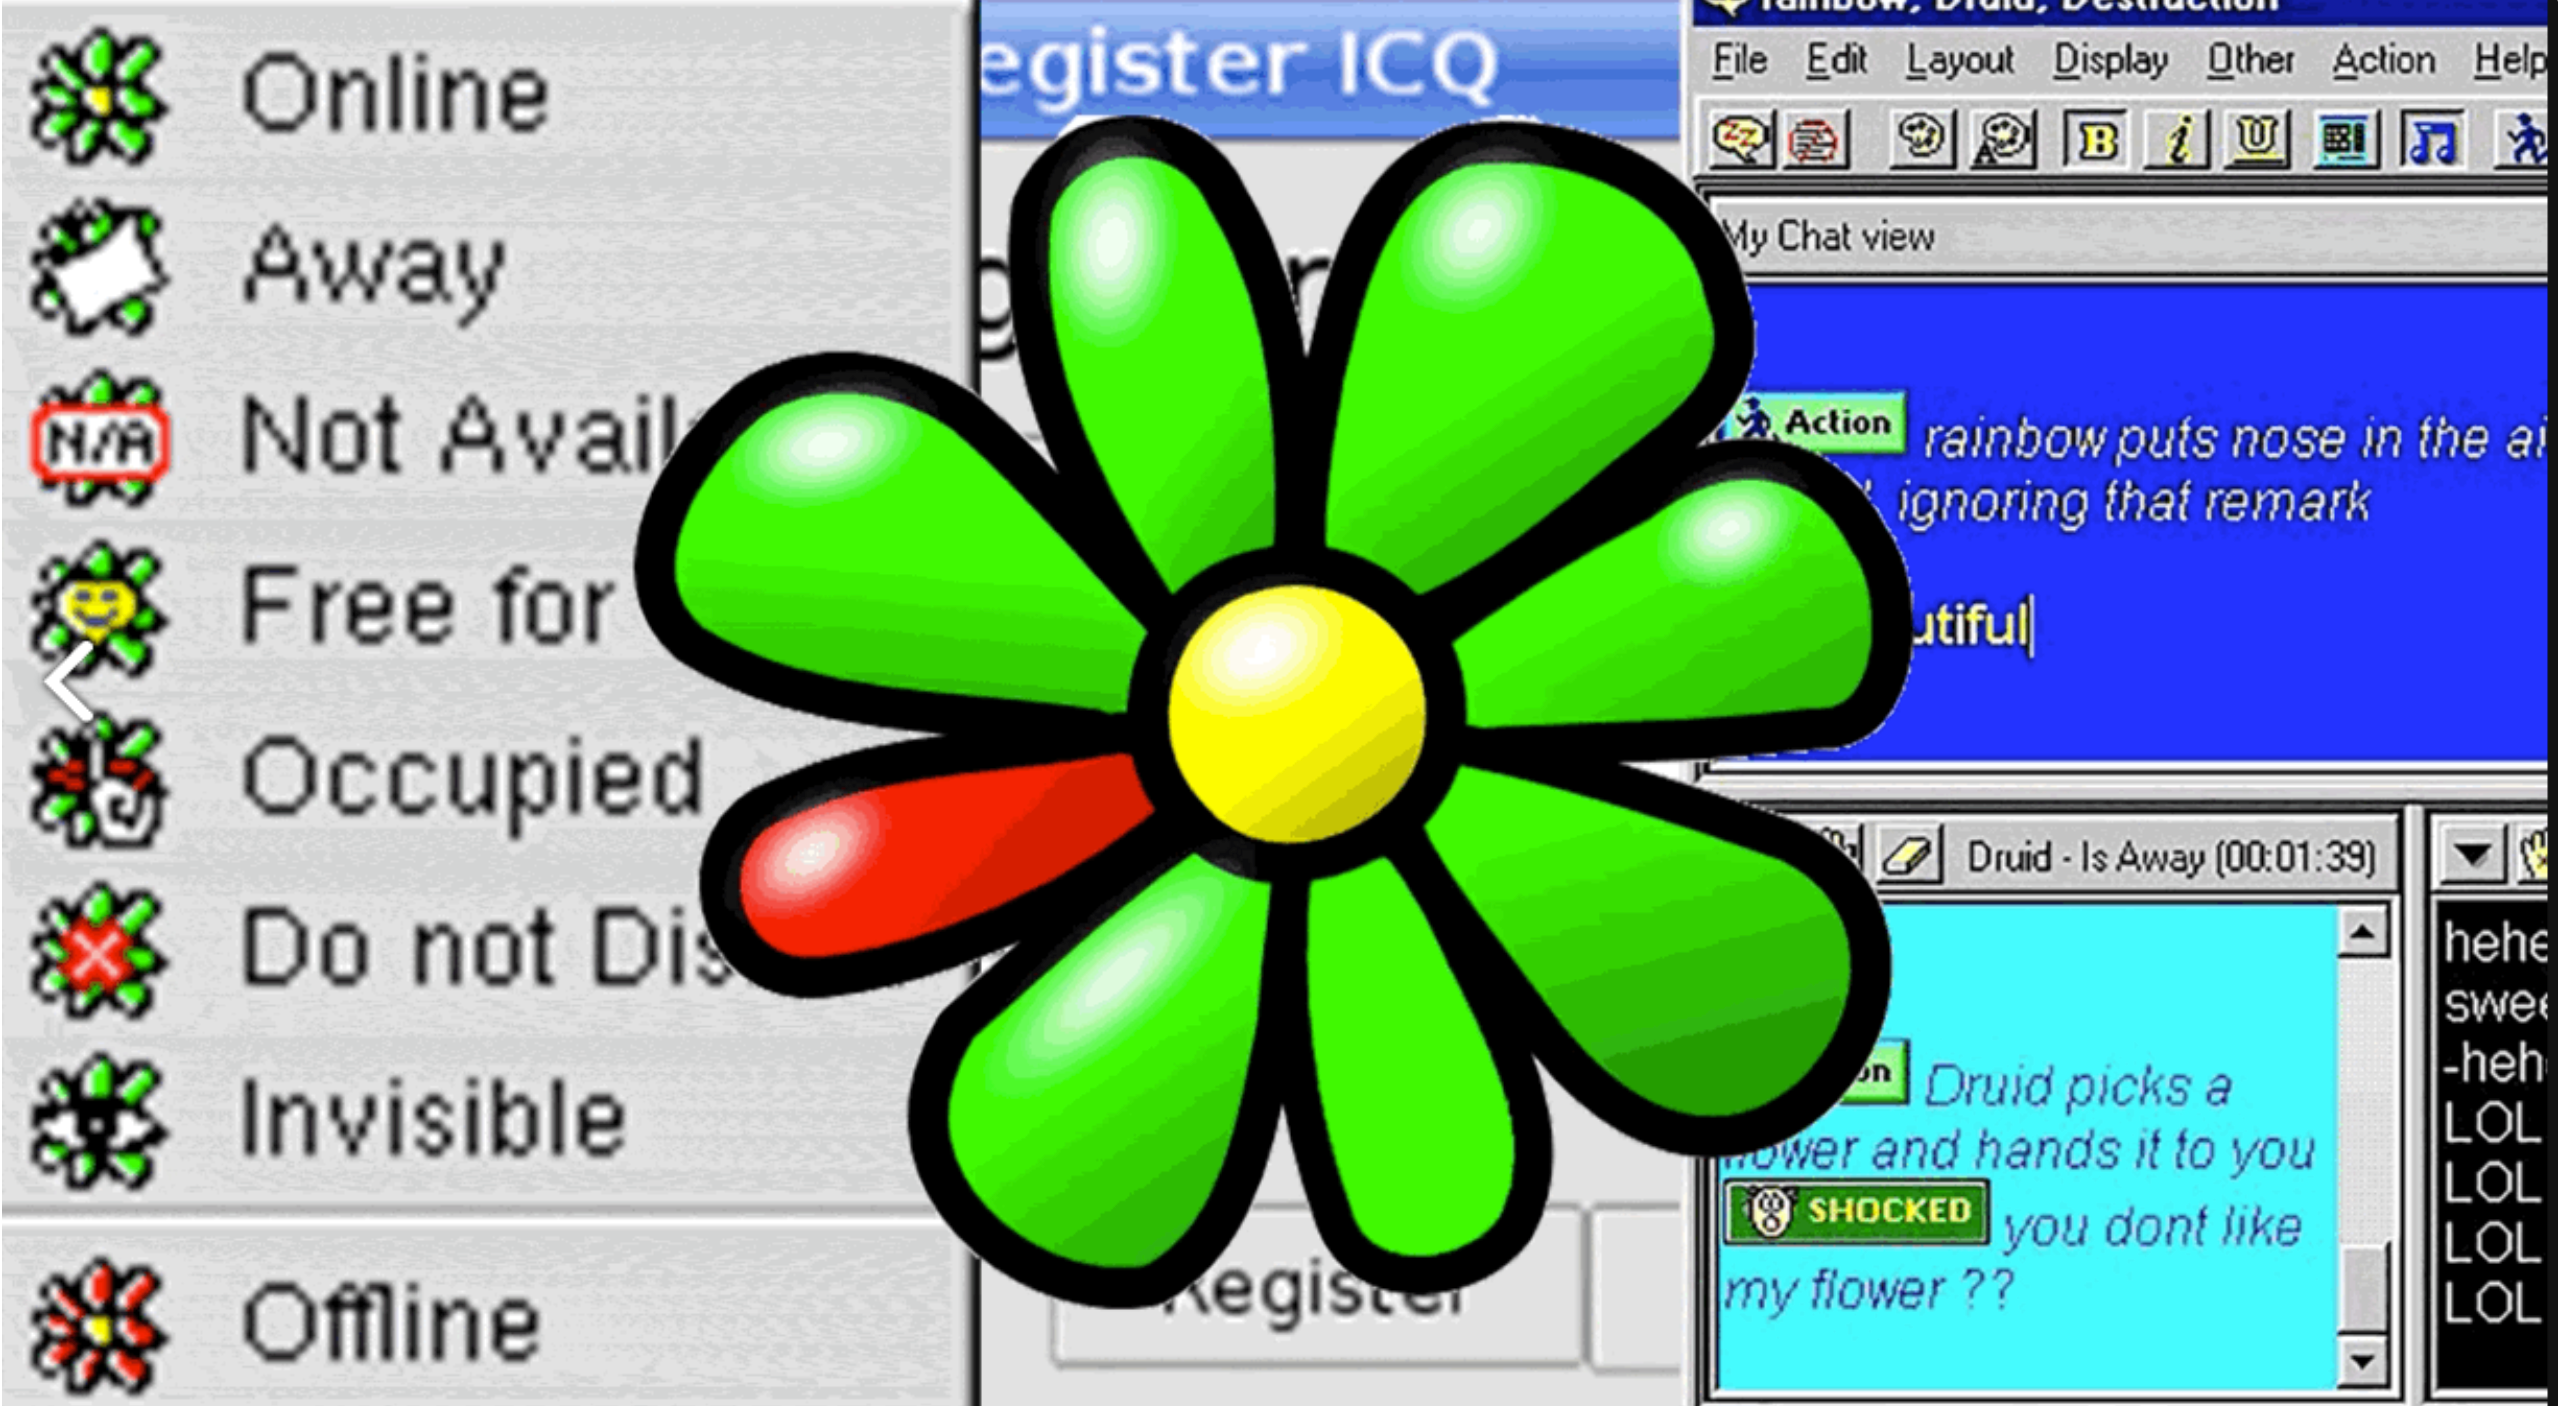 Icq chat rooms